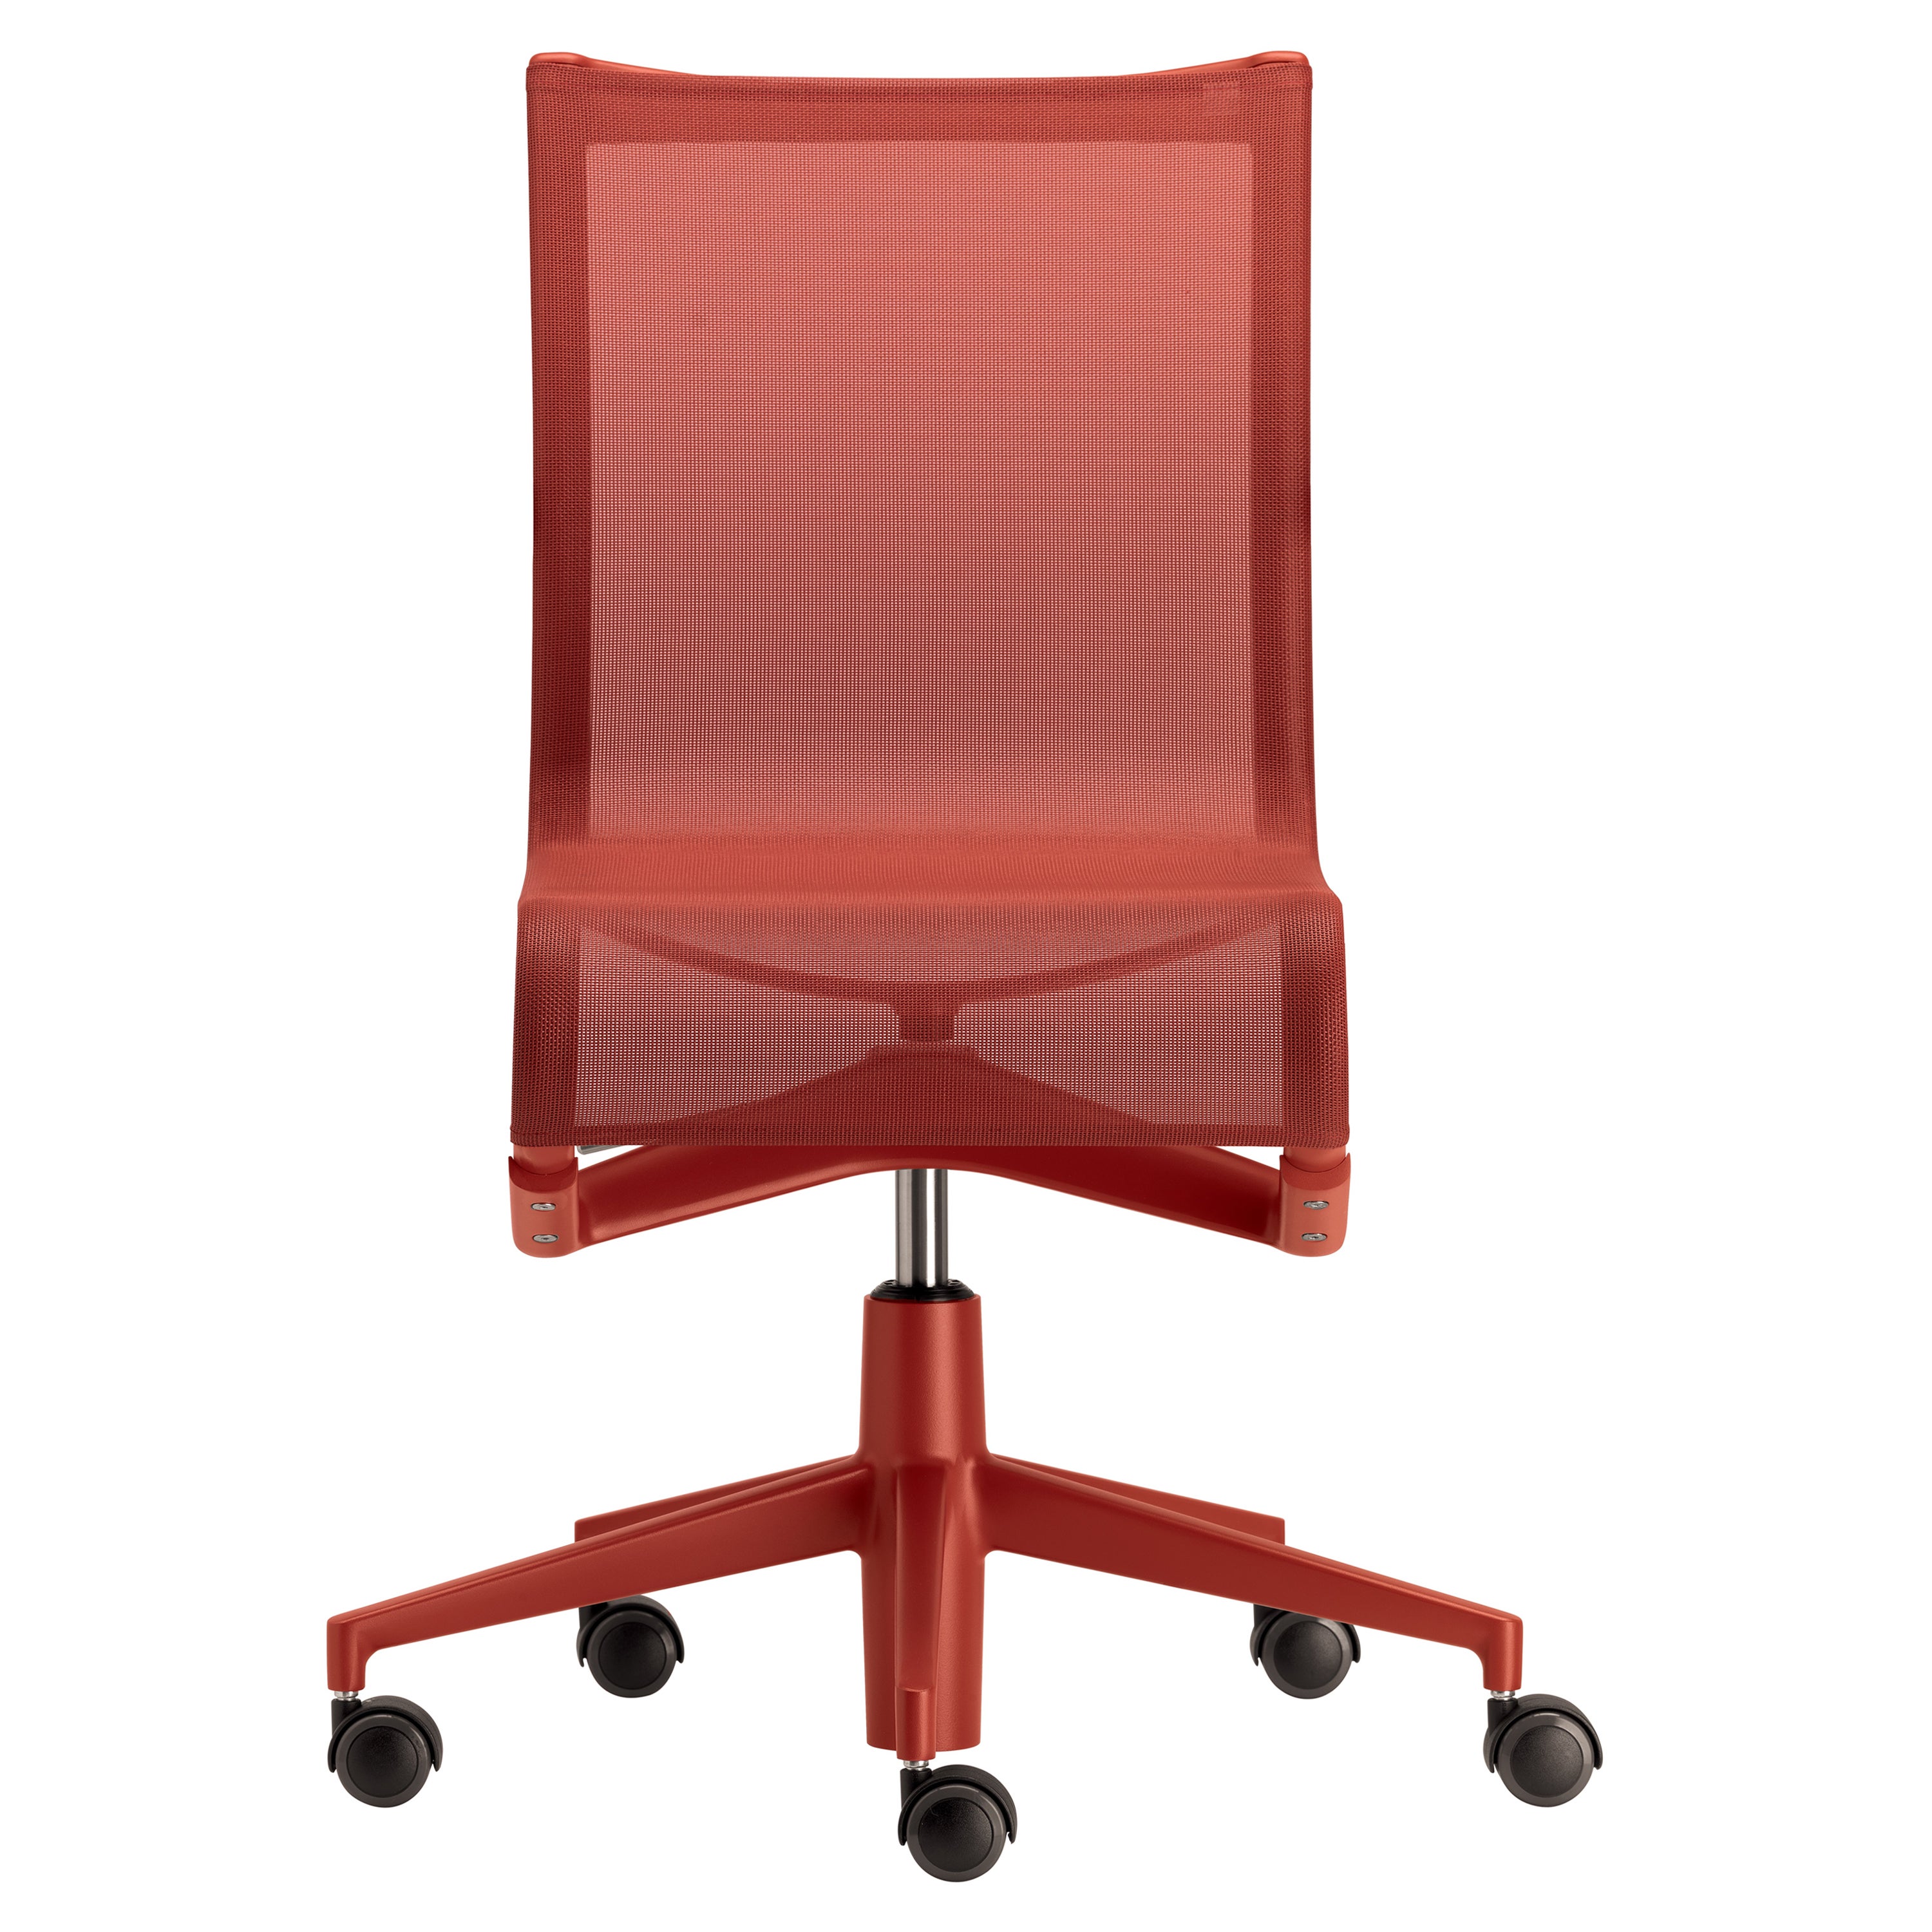 Alias 432 Rollingframe 44 Chair in Coral Red Mesh & Red Lacquered Aluminum Frame For Sale